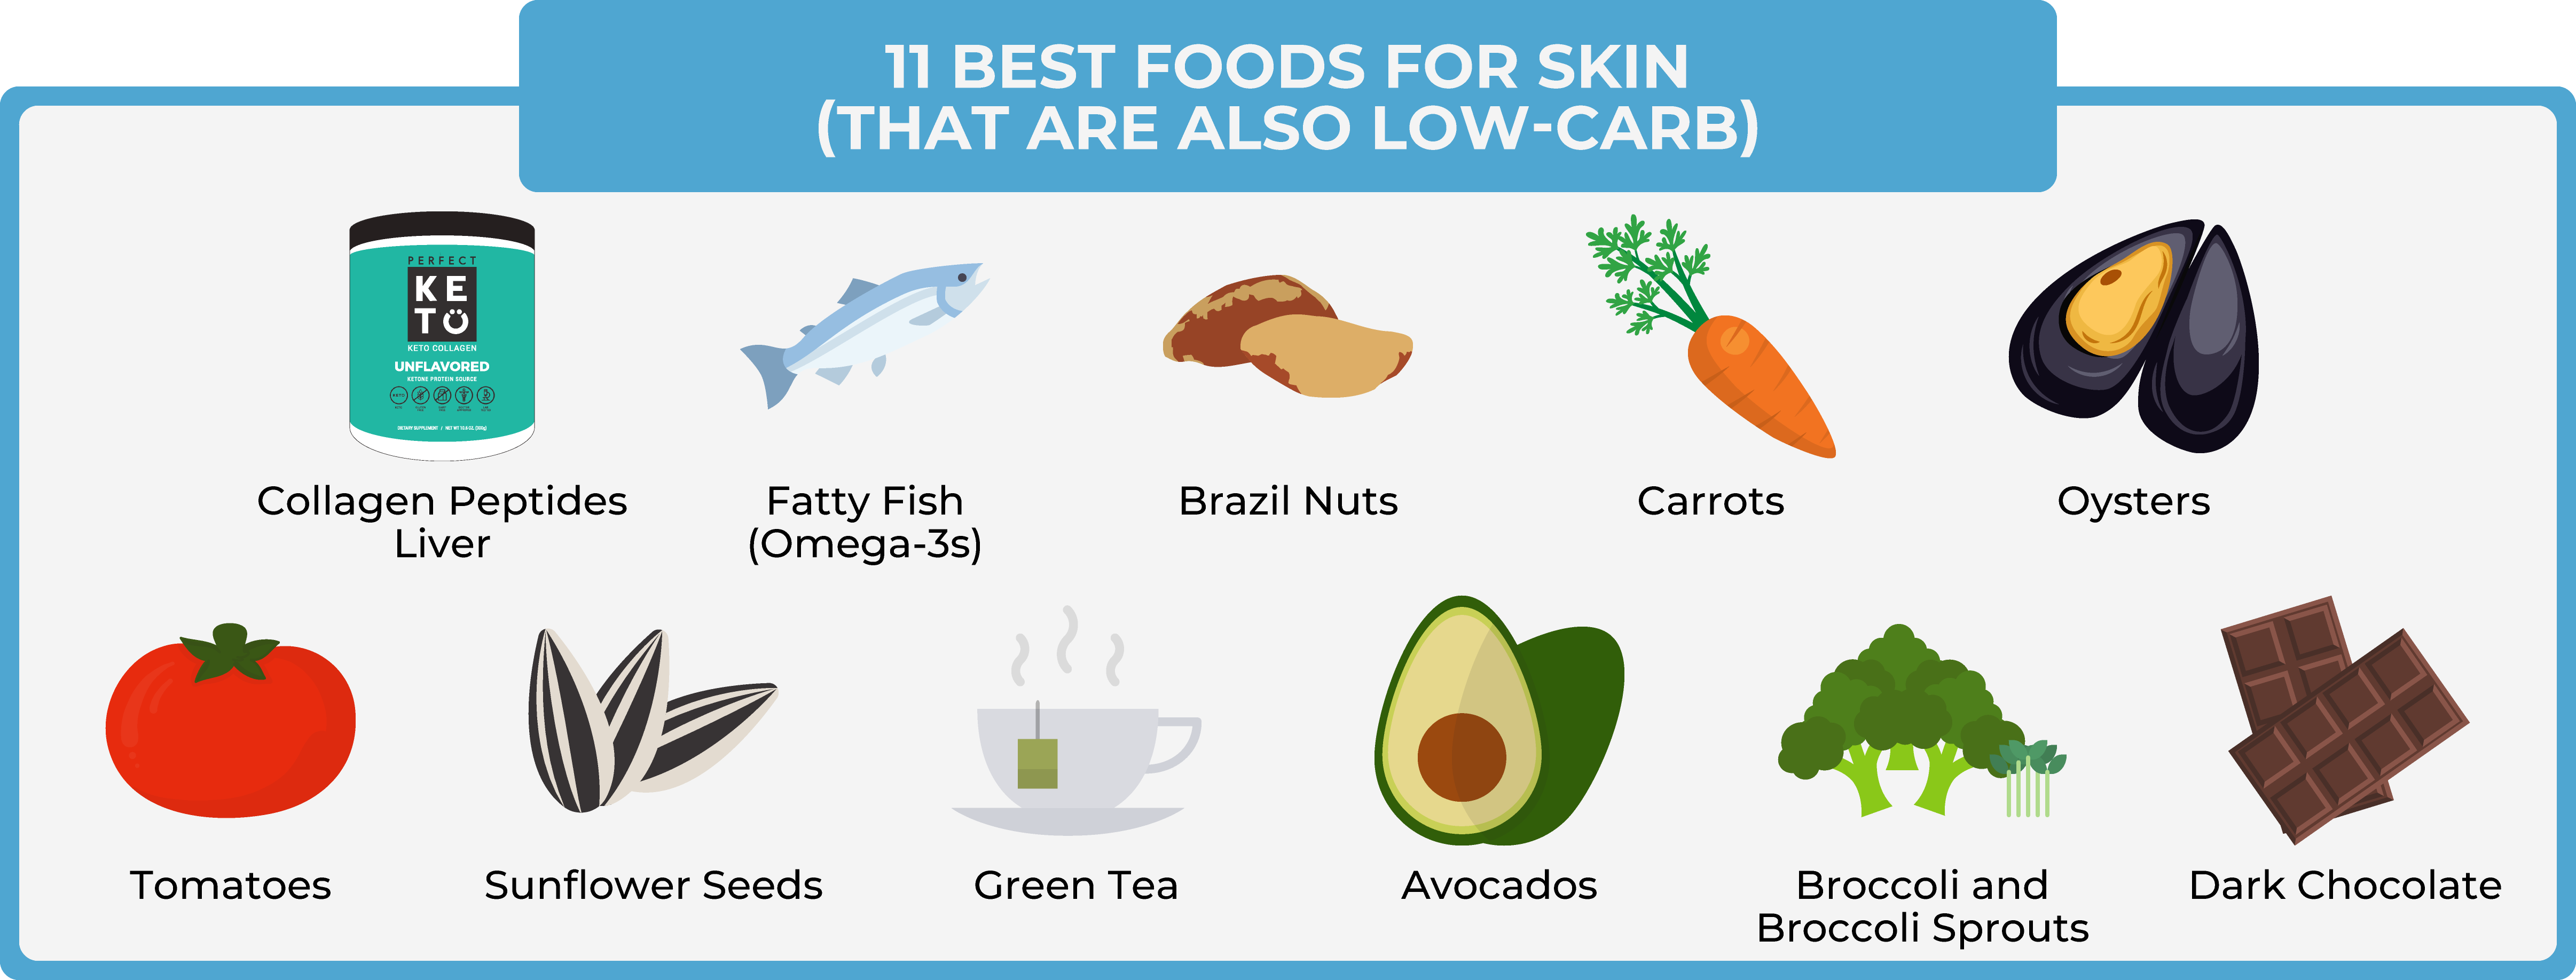 11-best-foods-for-skin.png